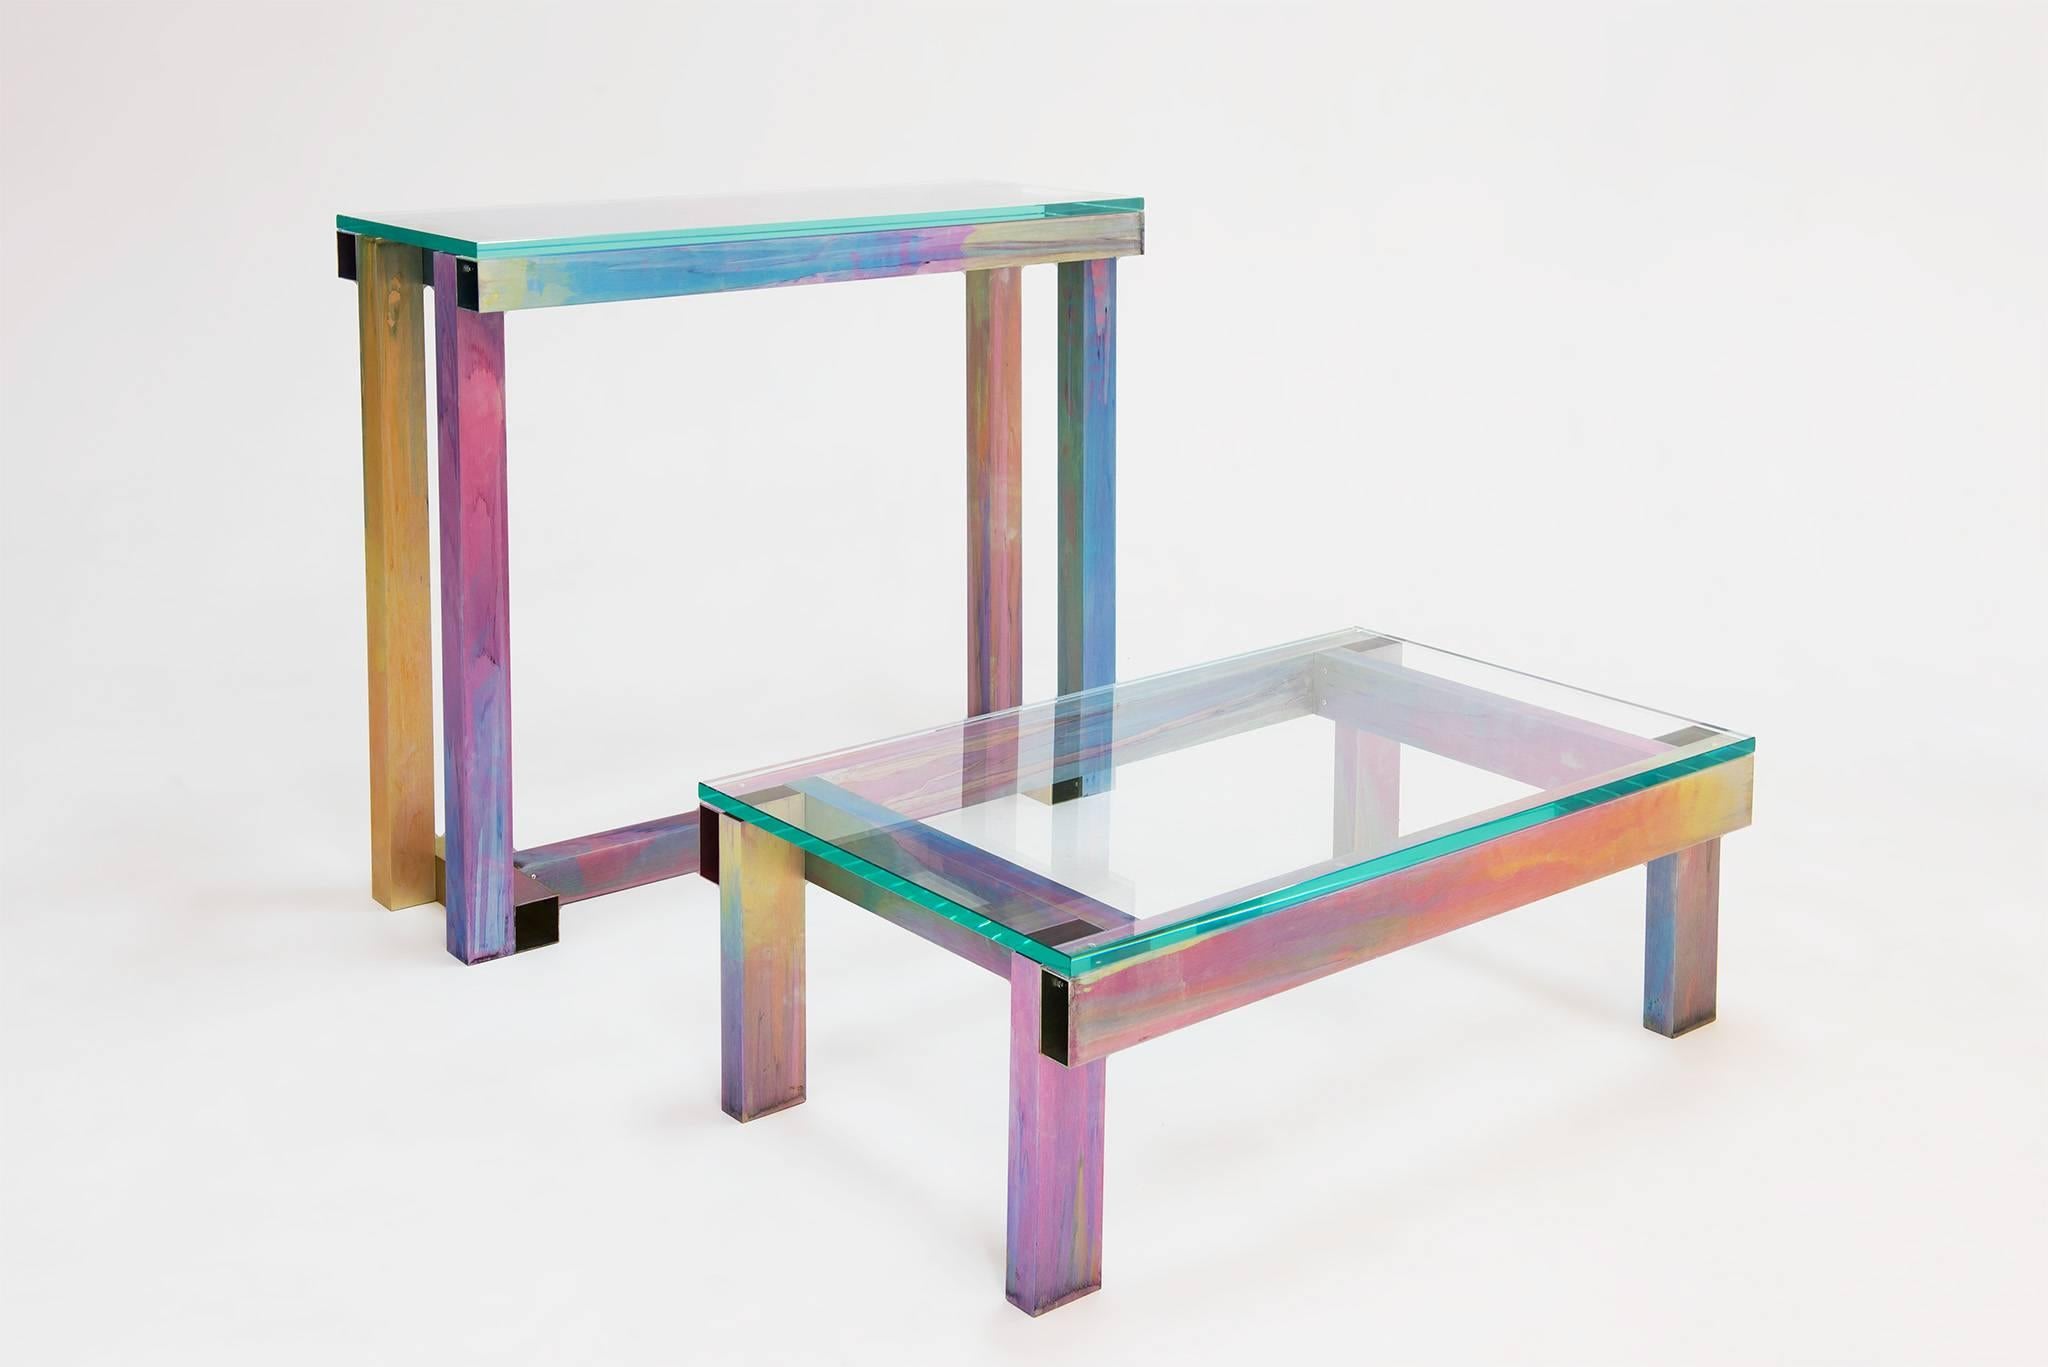 Fredrik Paulsen’s console table, commissioned by Etage Projects for Salon Art + Design New York 2017, turns the spotlight on a brand new and unique technique that combines anodized aluminium with his signature rainbow tie-dye we know from the Prism